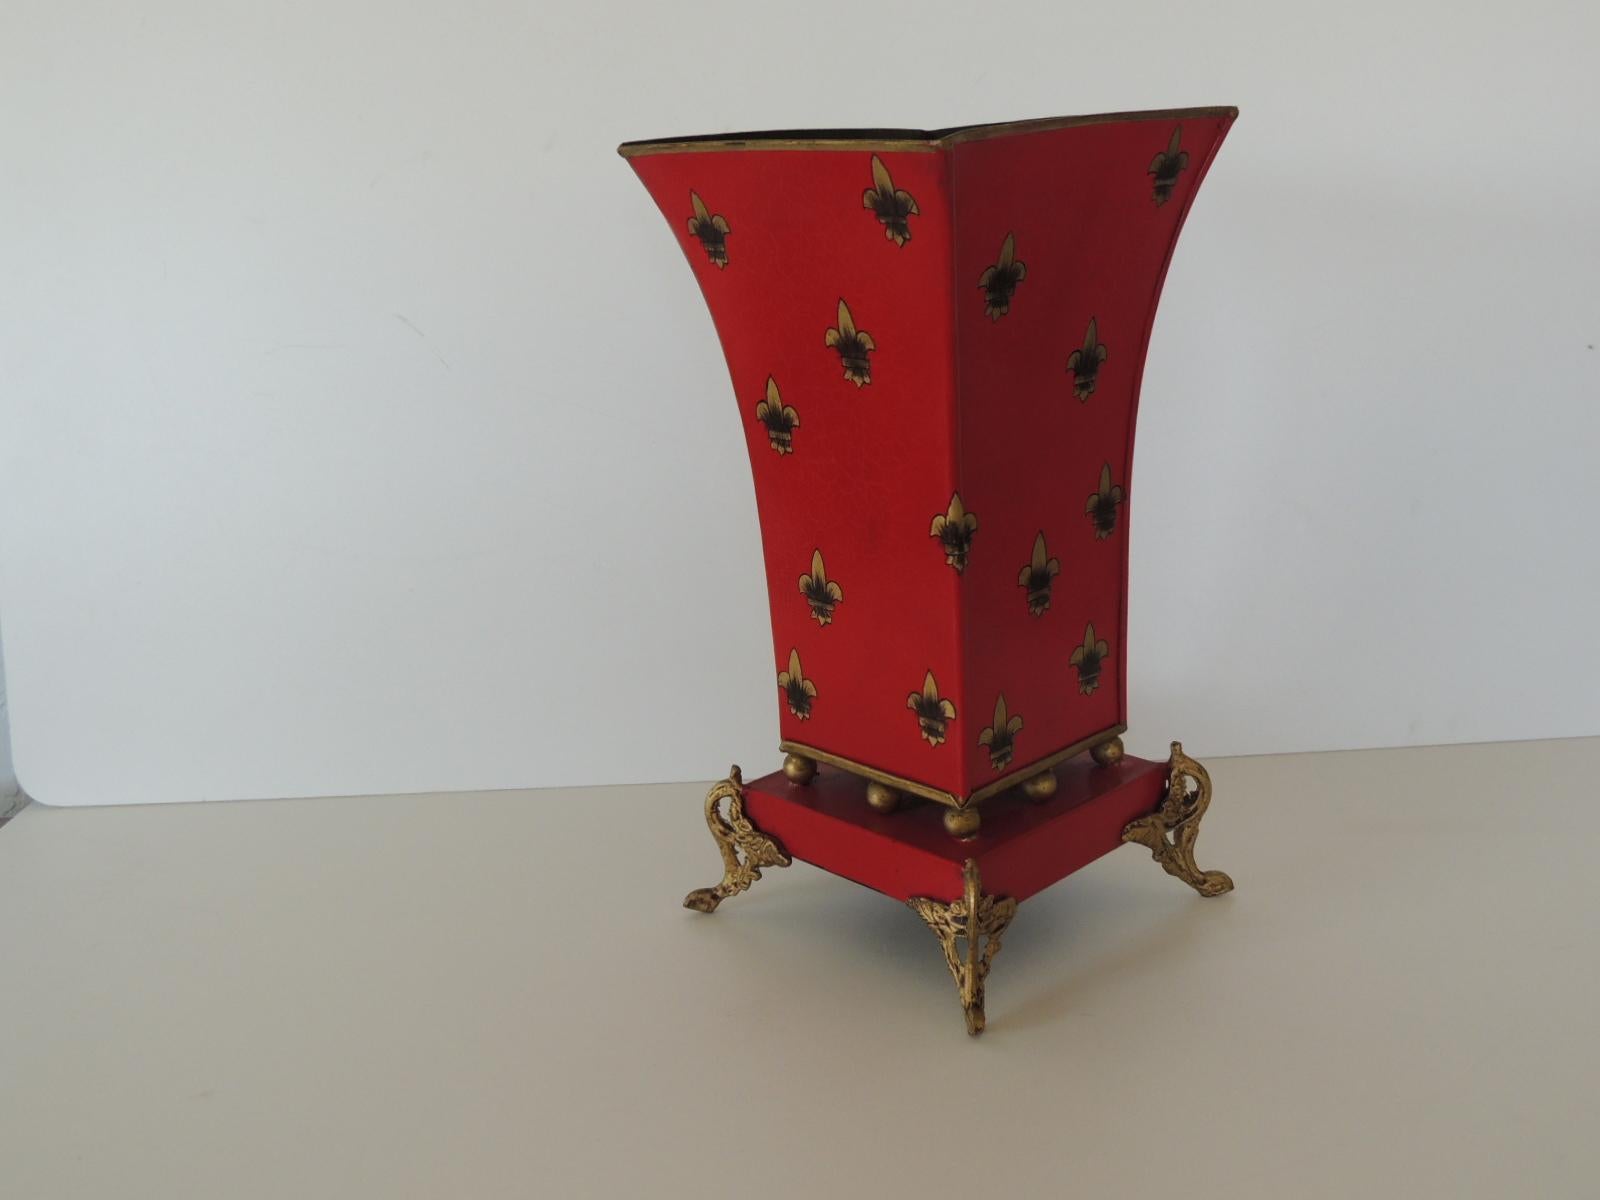 Red and gold tall cachepot with fleur-de-lis design.
Tall urn with ball details and brass scrolling feet.
Size: 7” W x 7